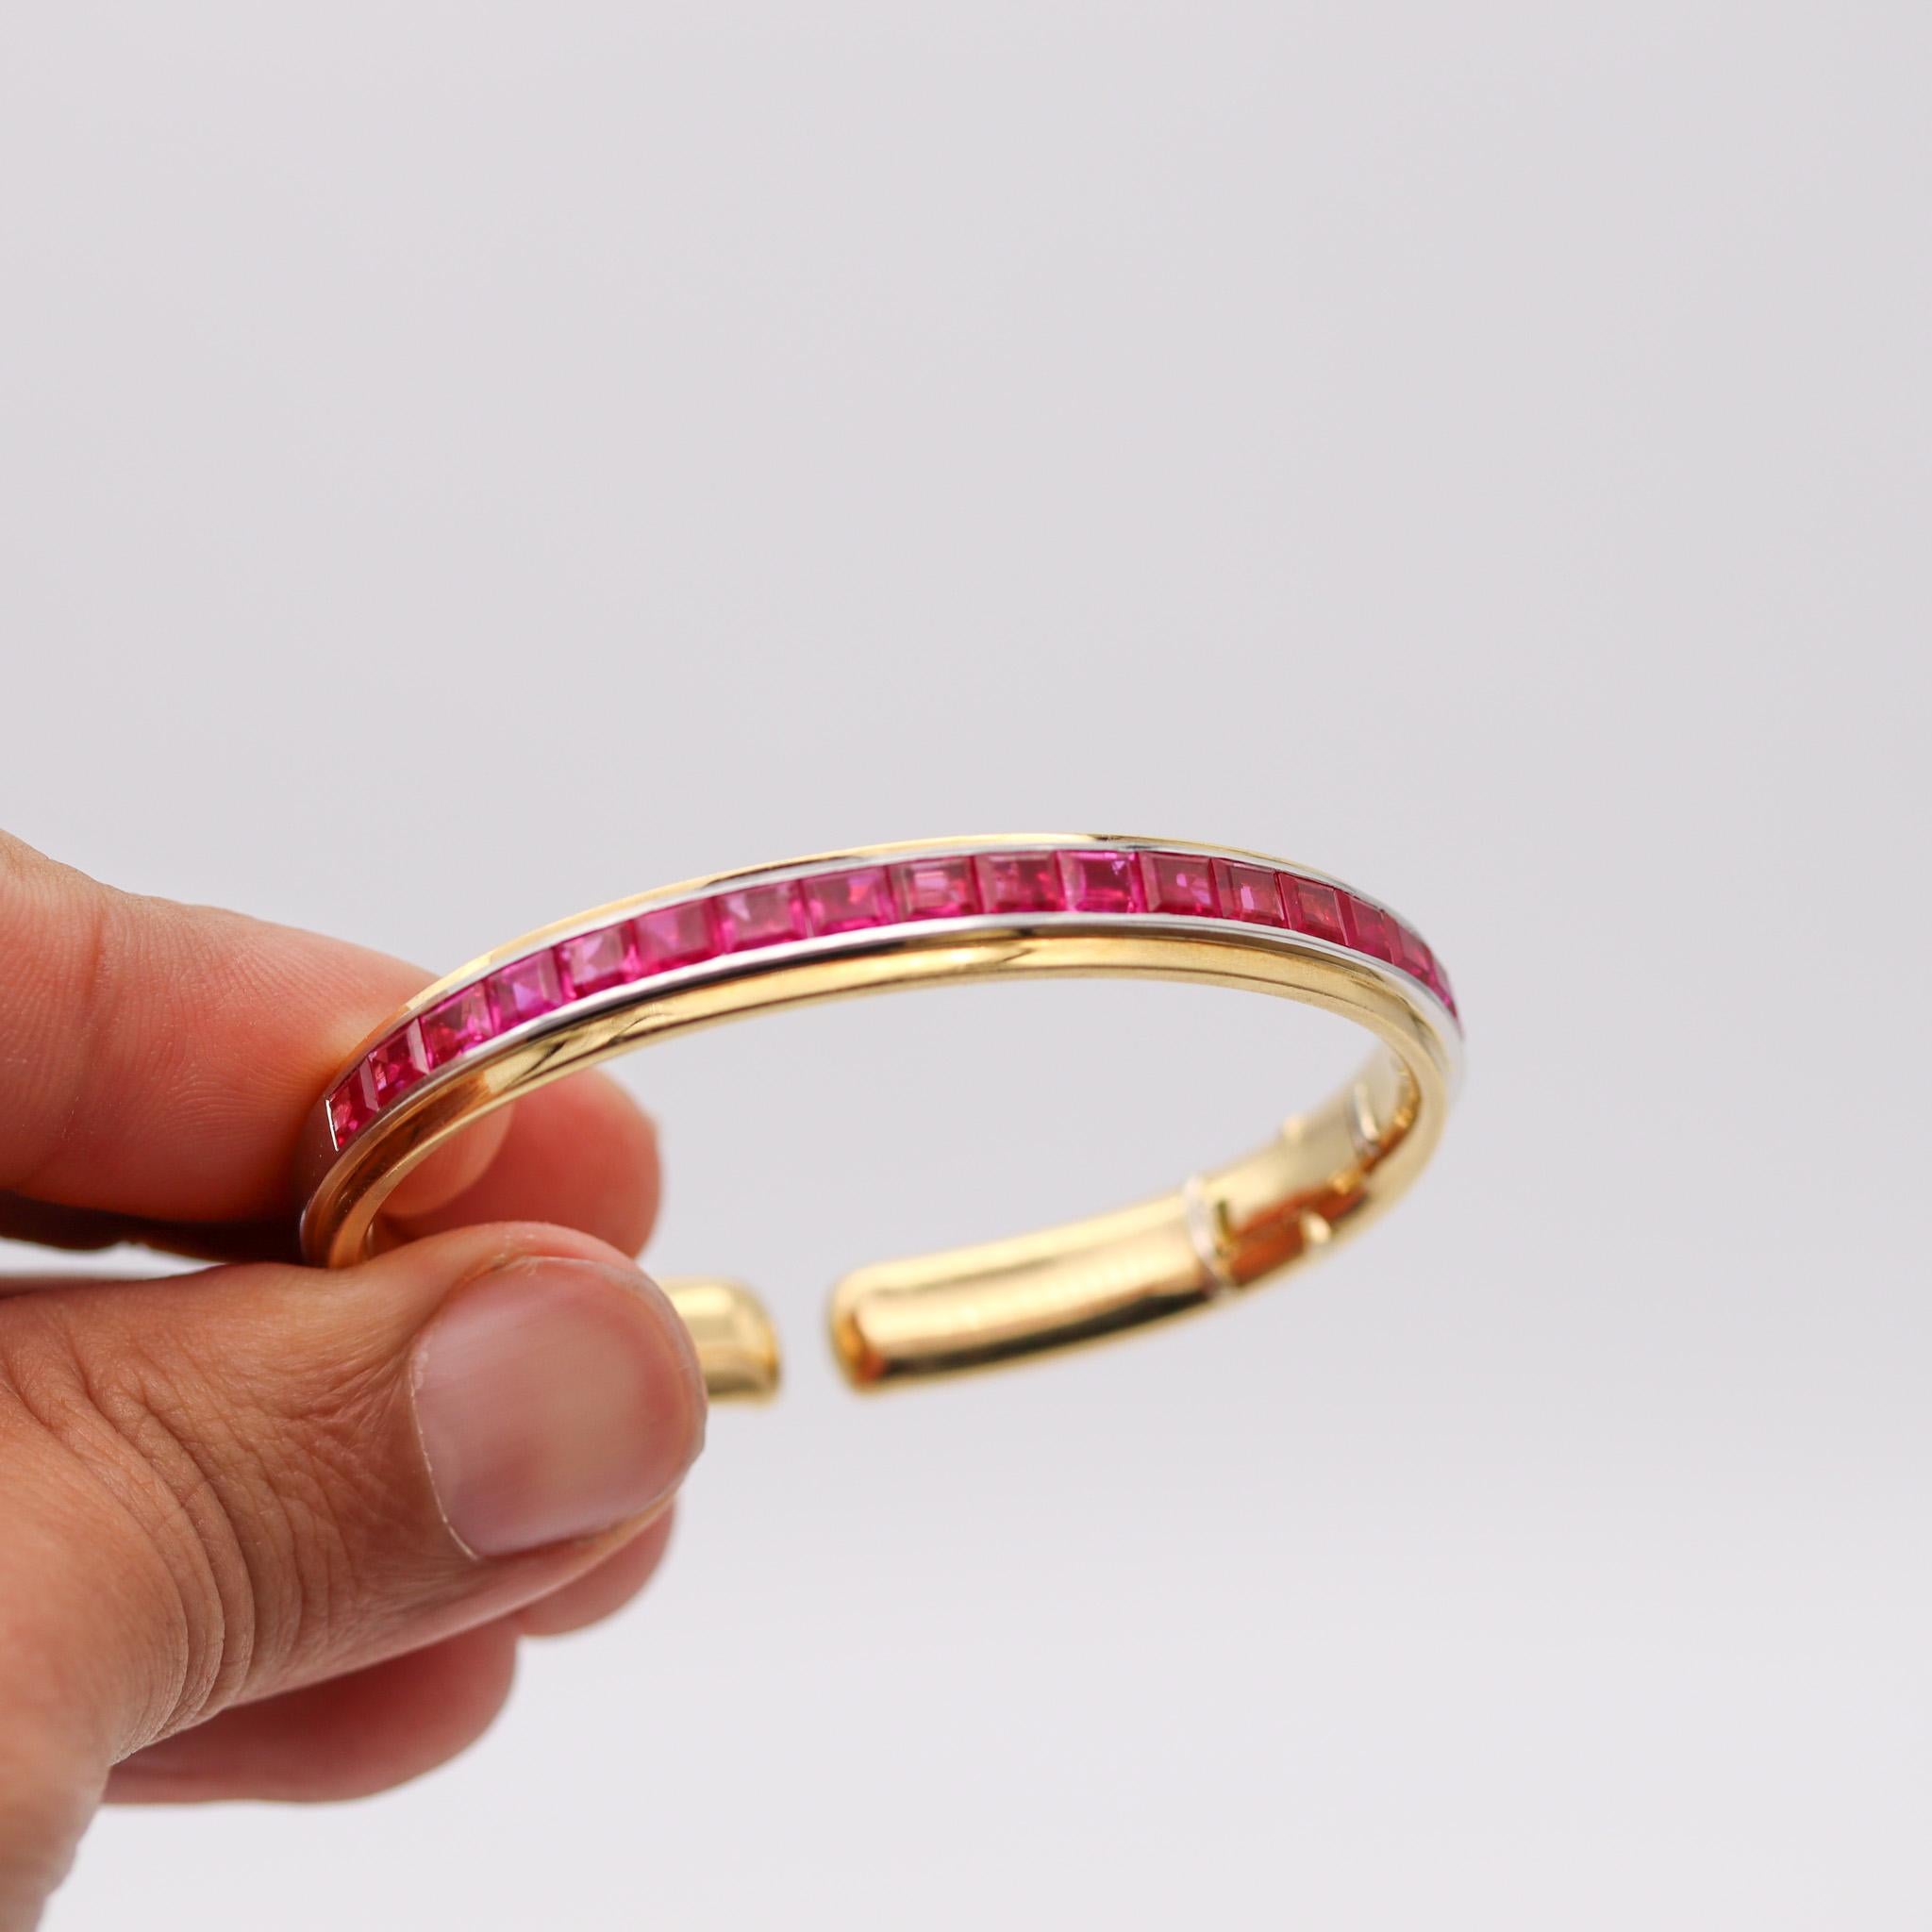 Women's or Men's Hemmerle Bangle Bracelet In 18Kt Gold And Platinum With 22.65 Ctw Red Rubies For Sale